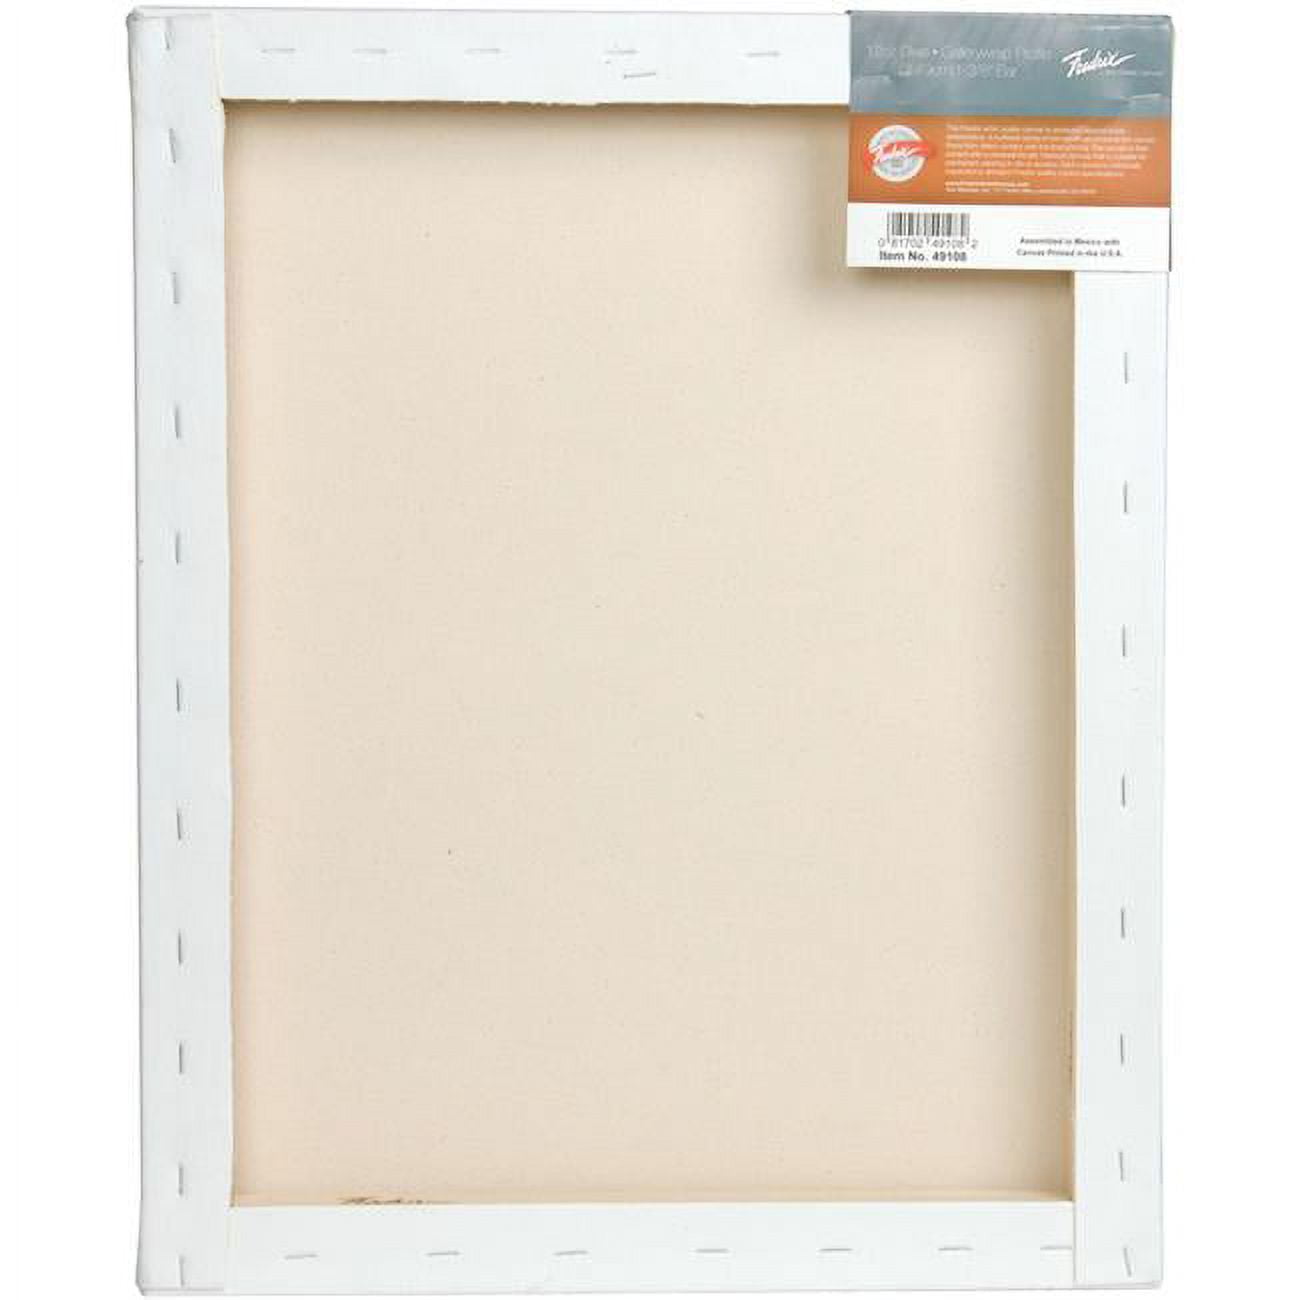 Fredrix 5614 Ultra Smooth Stretched Canvas, 36 by 48-Inch